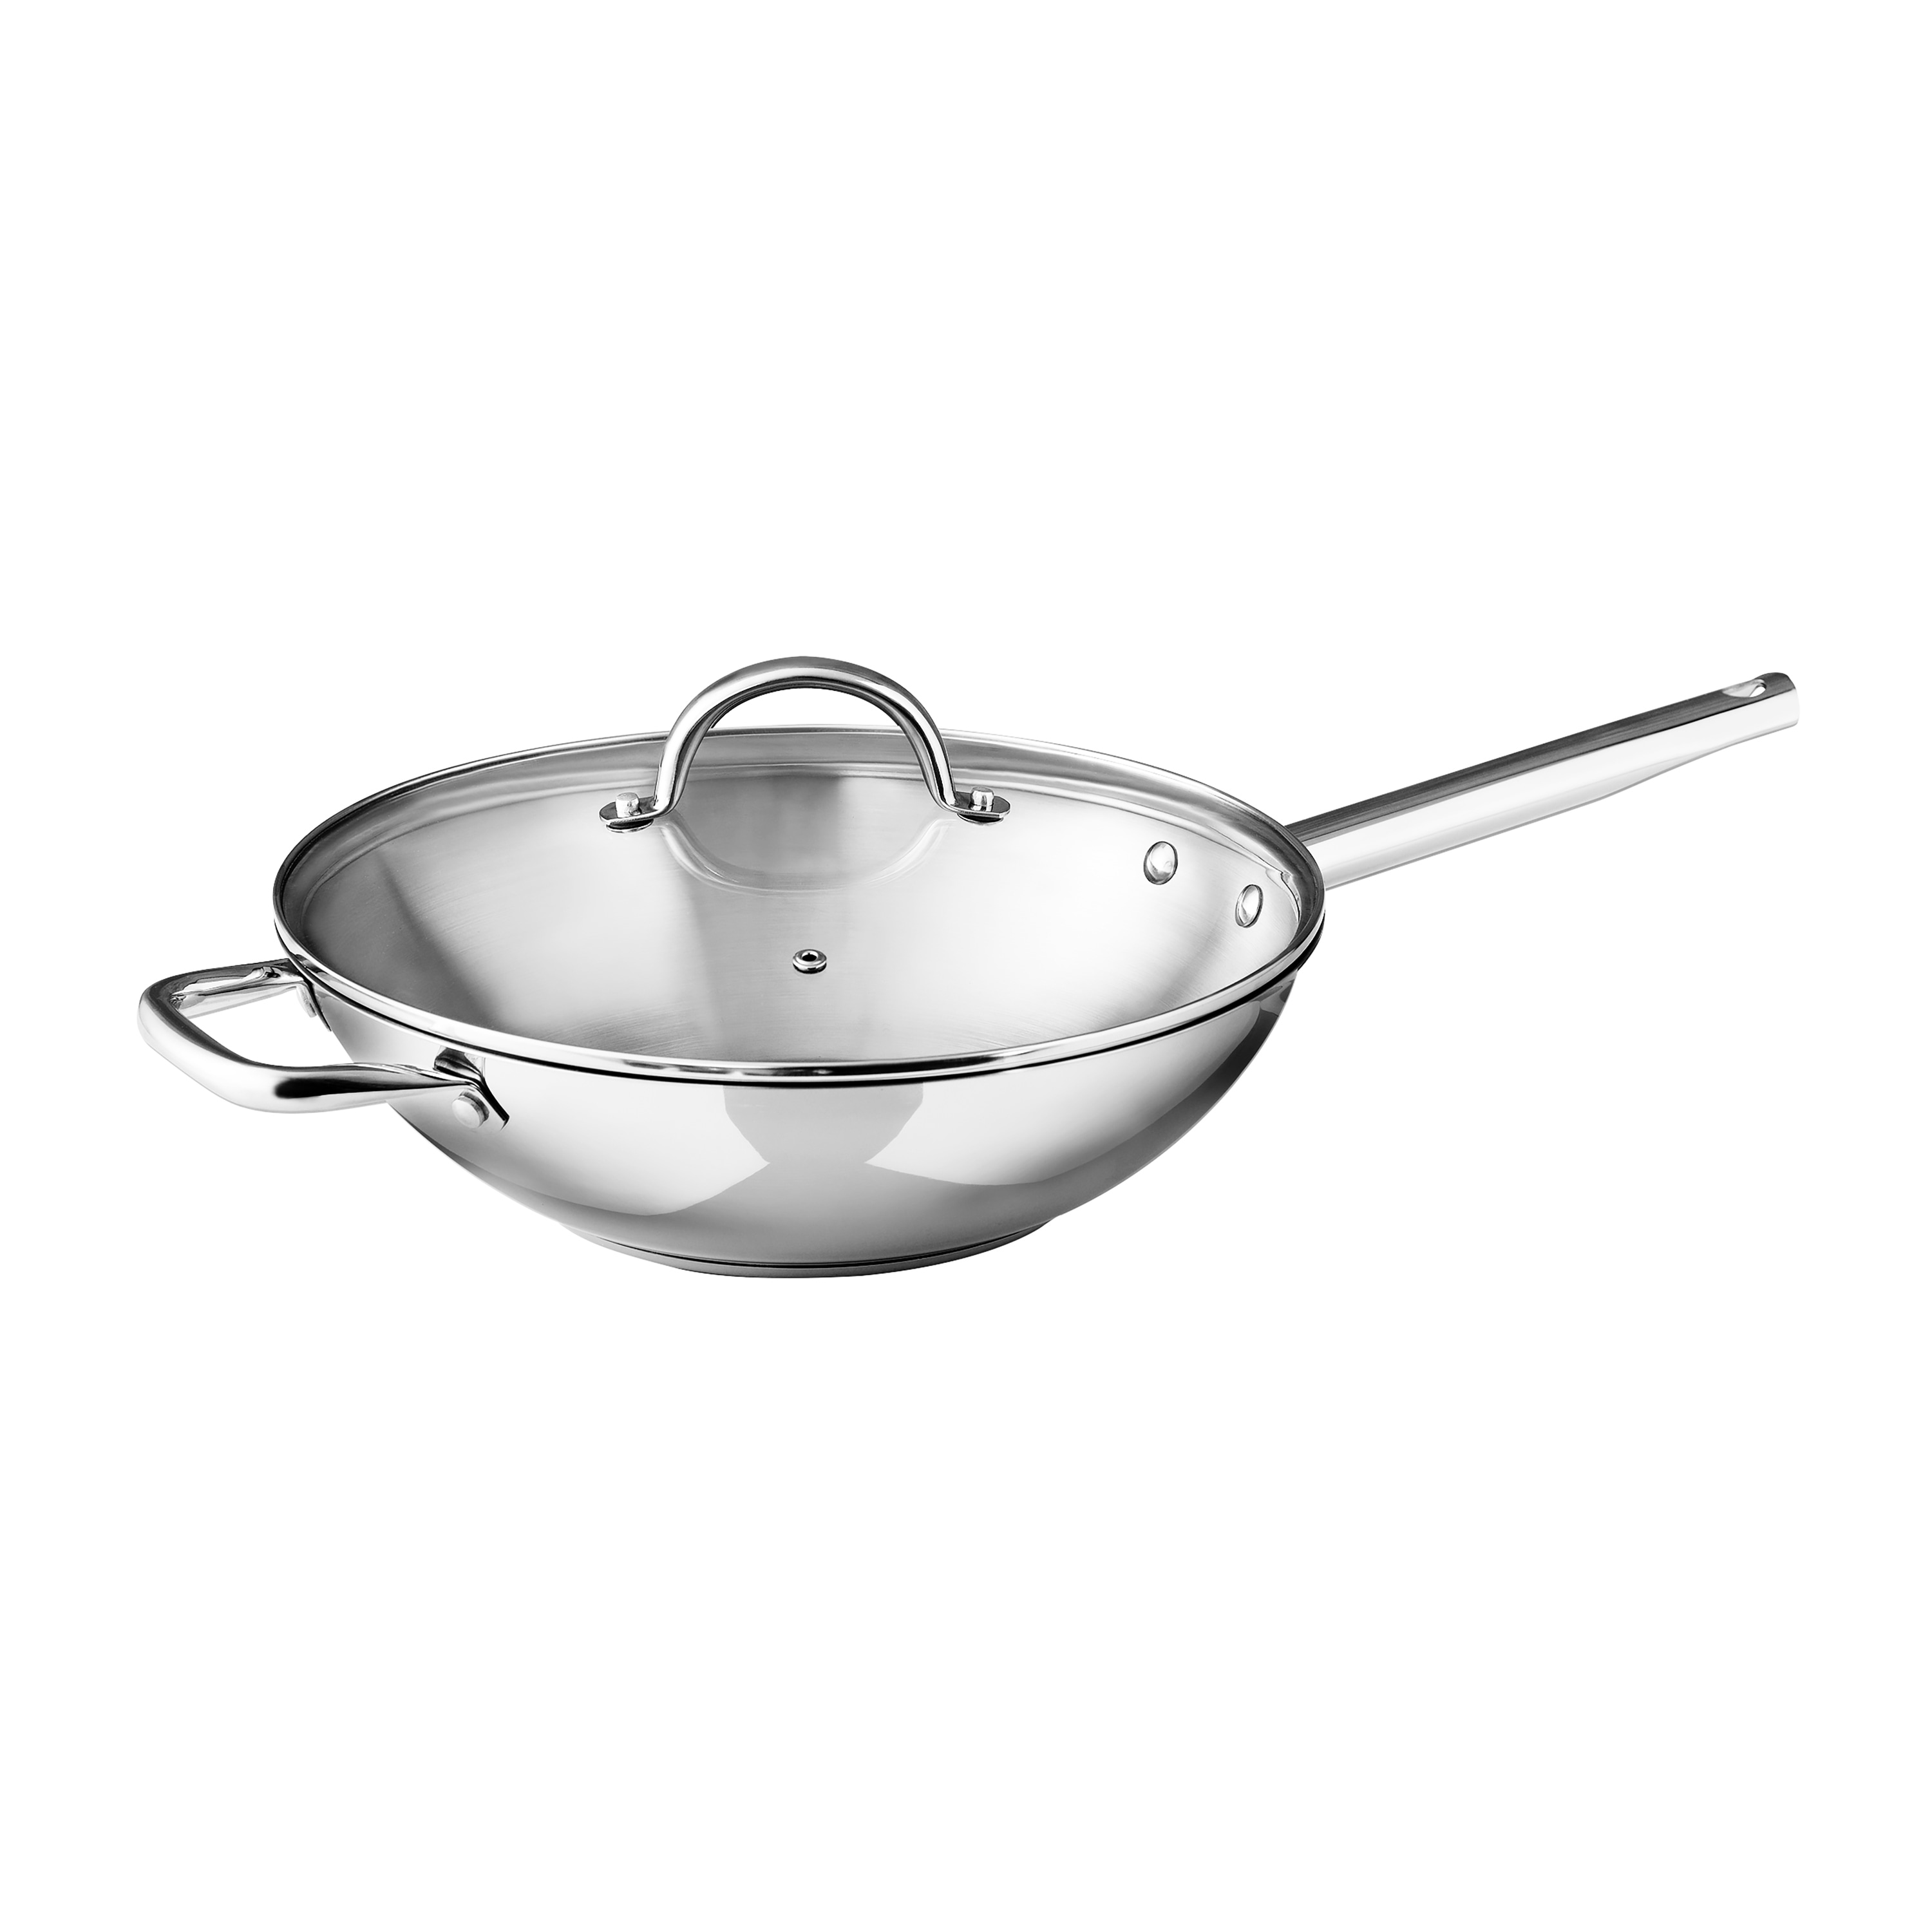 Bergner 12-Inch Fry Pan Stainless Steel Dishwasher Safe Induction Ready  with Lid - On Sale - Bed Bath & Beyond - 35727656